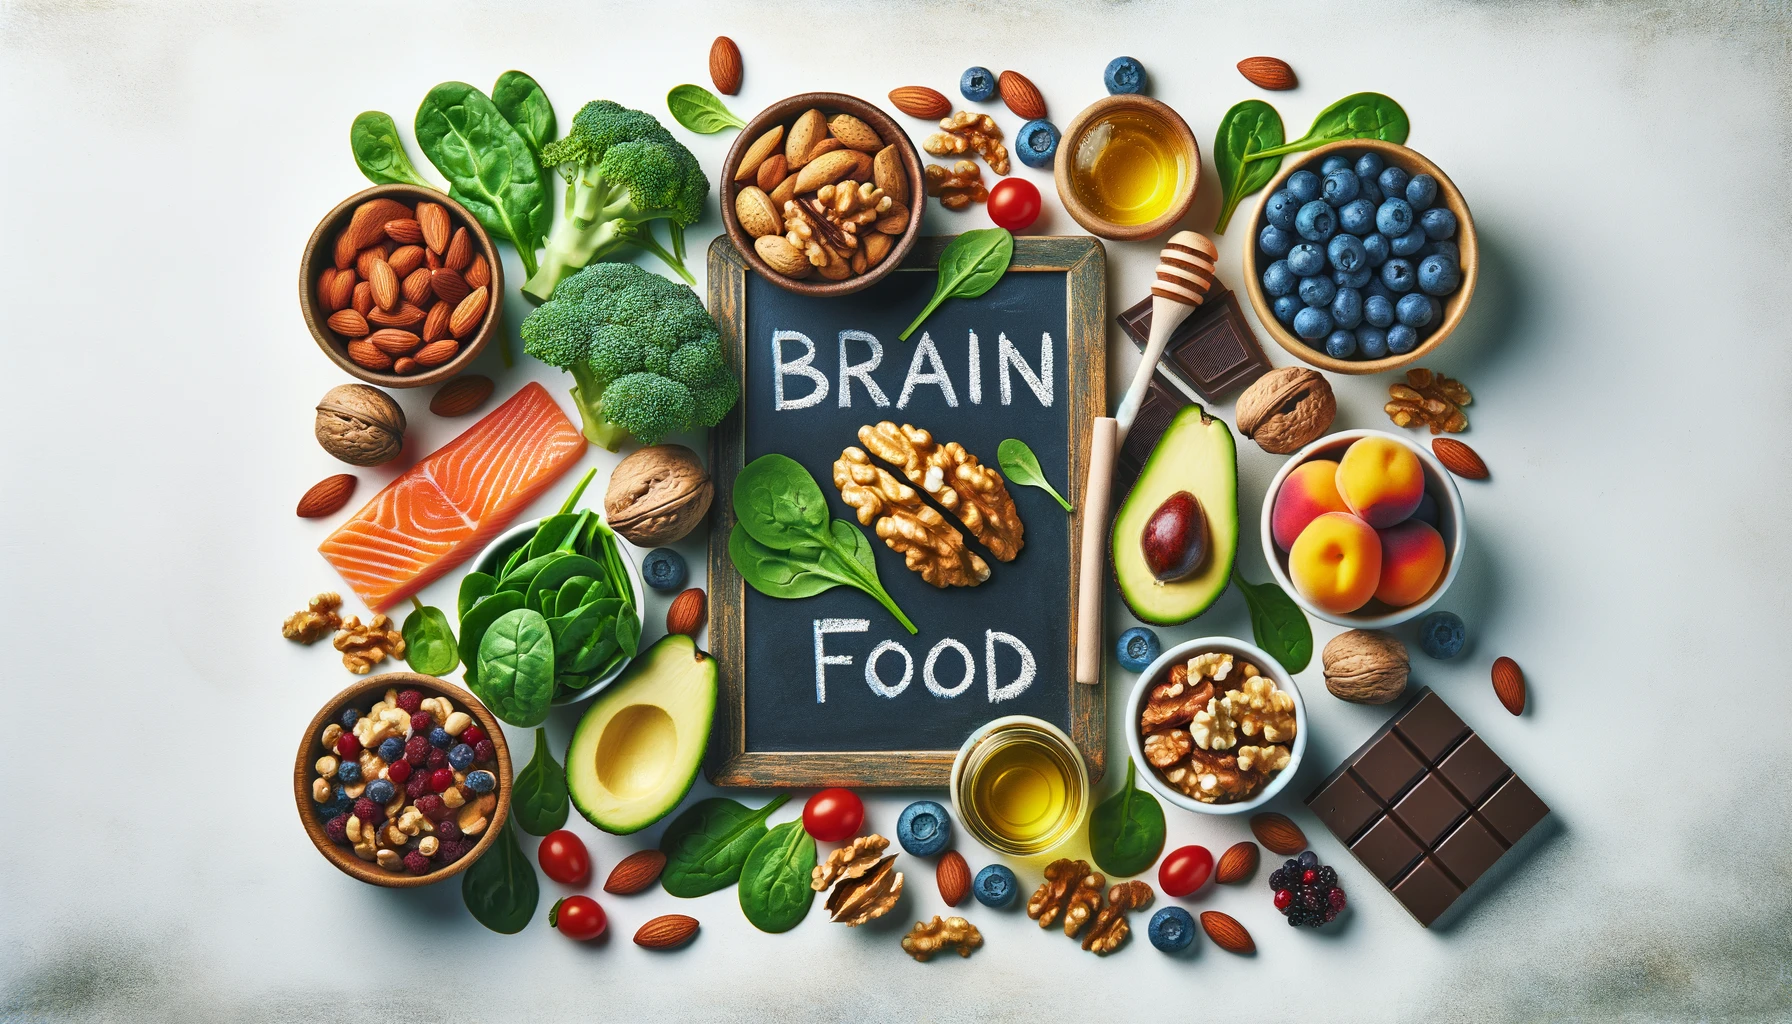 Chalkboard in the middle of a spread of healthy foods, with the text "Brain Food" written in white chalk